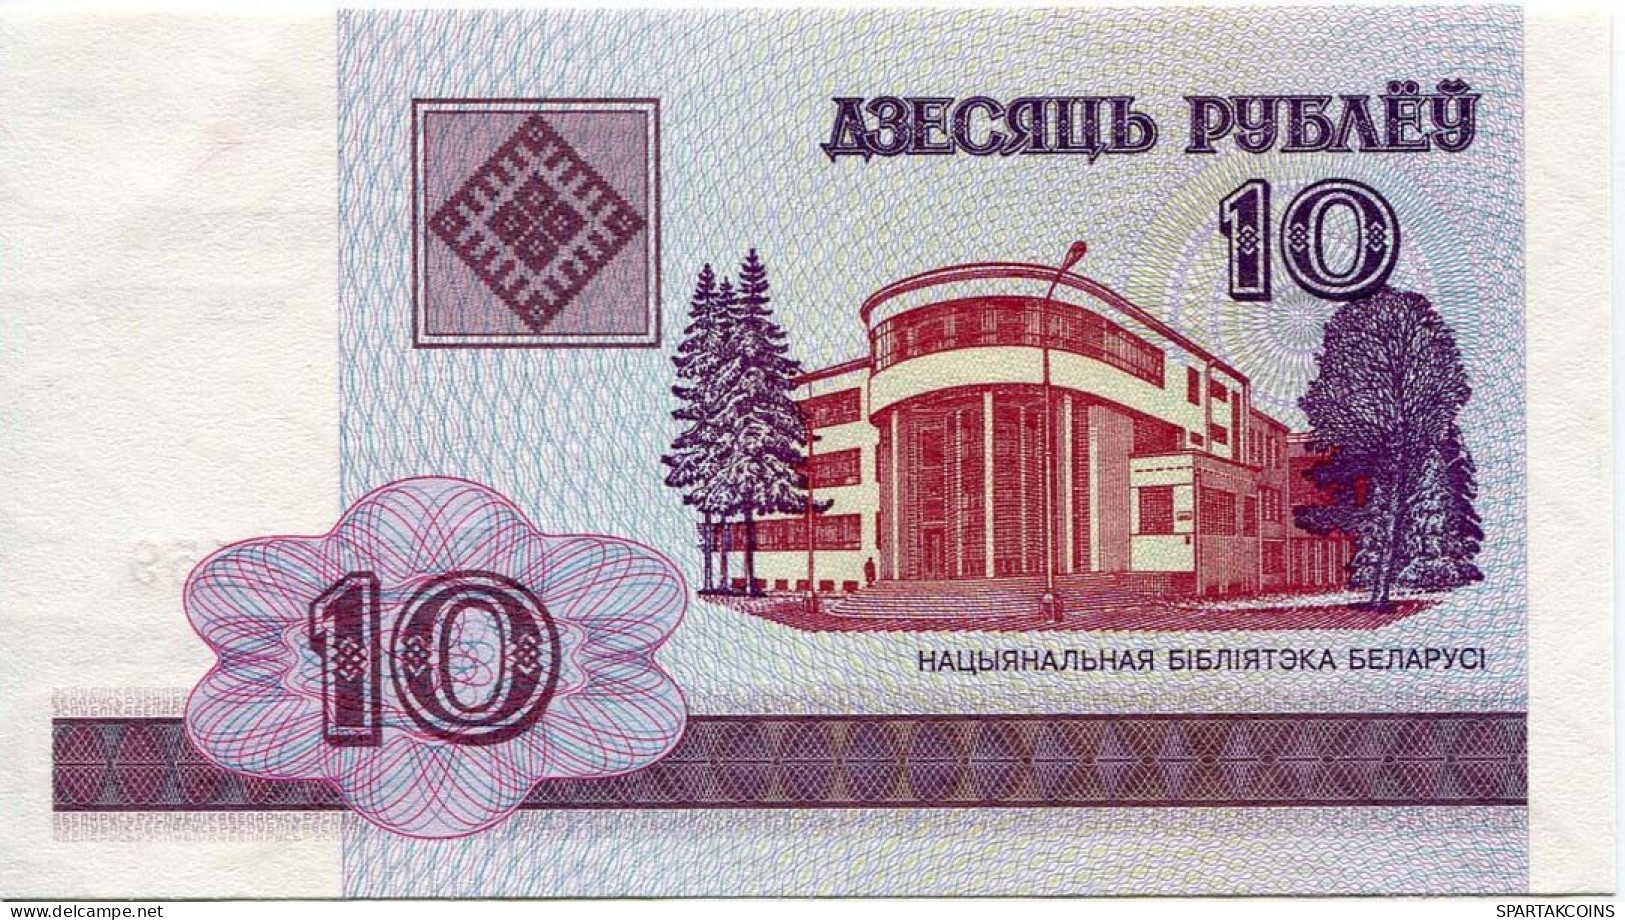 BELARUS 10 RUBLES 2000 National Library Of Belarus Paper Money Banknote #P10200.V - [11] Local Banknote Issues